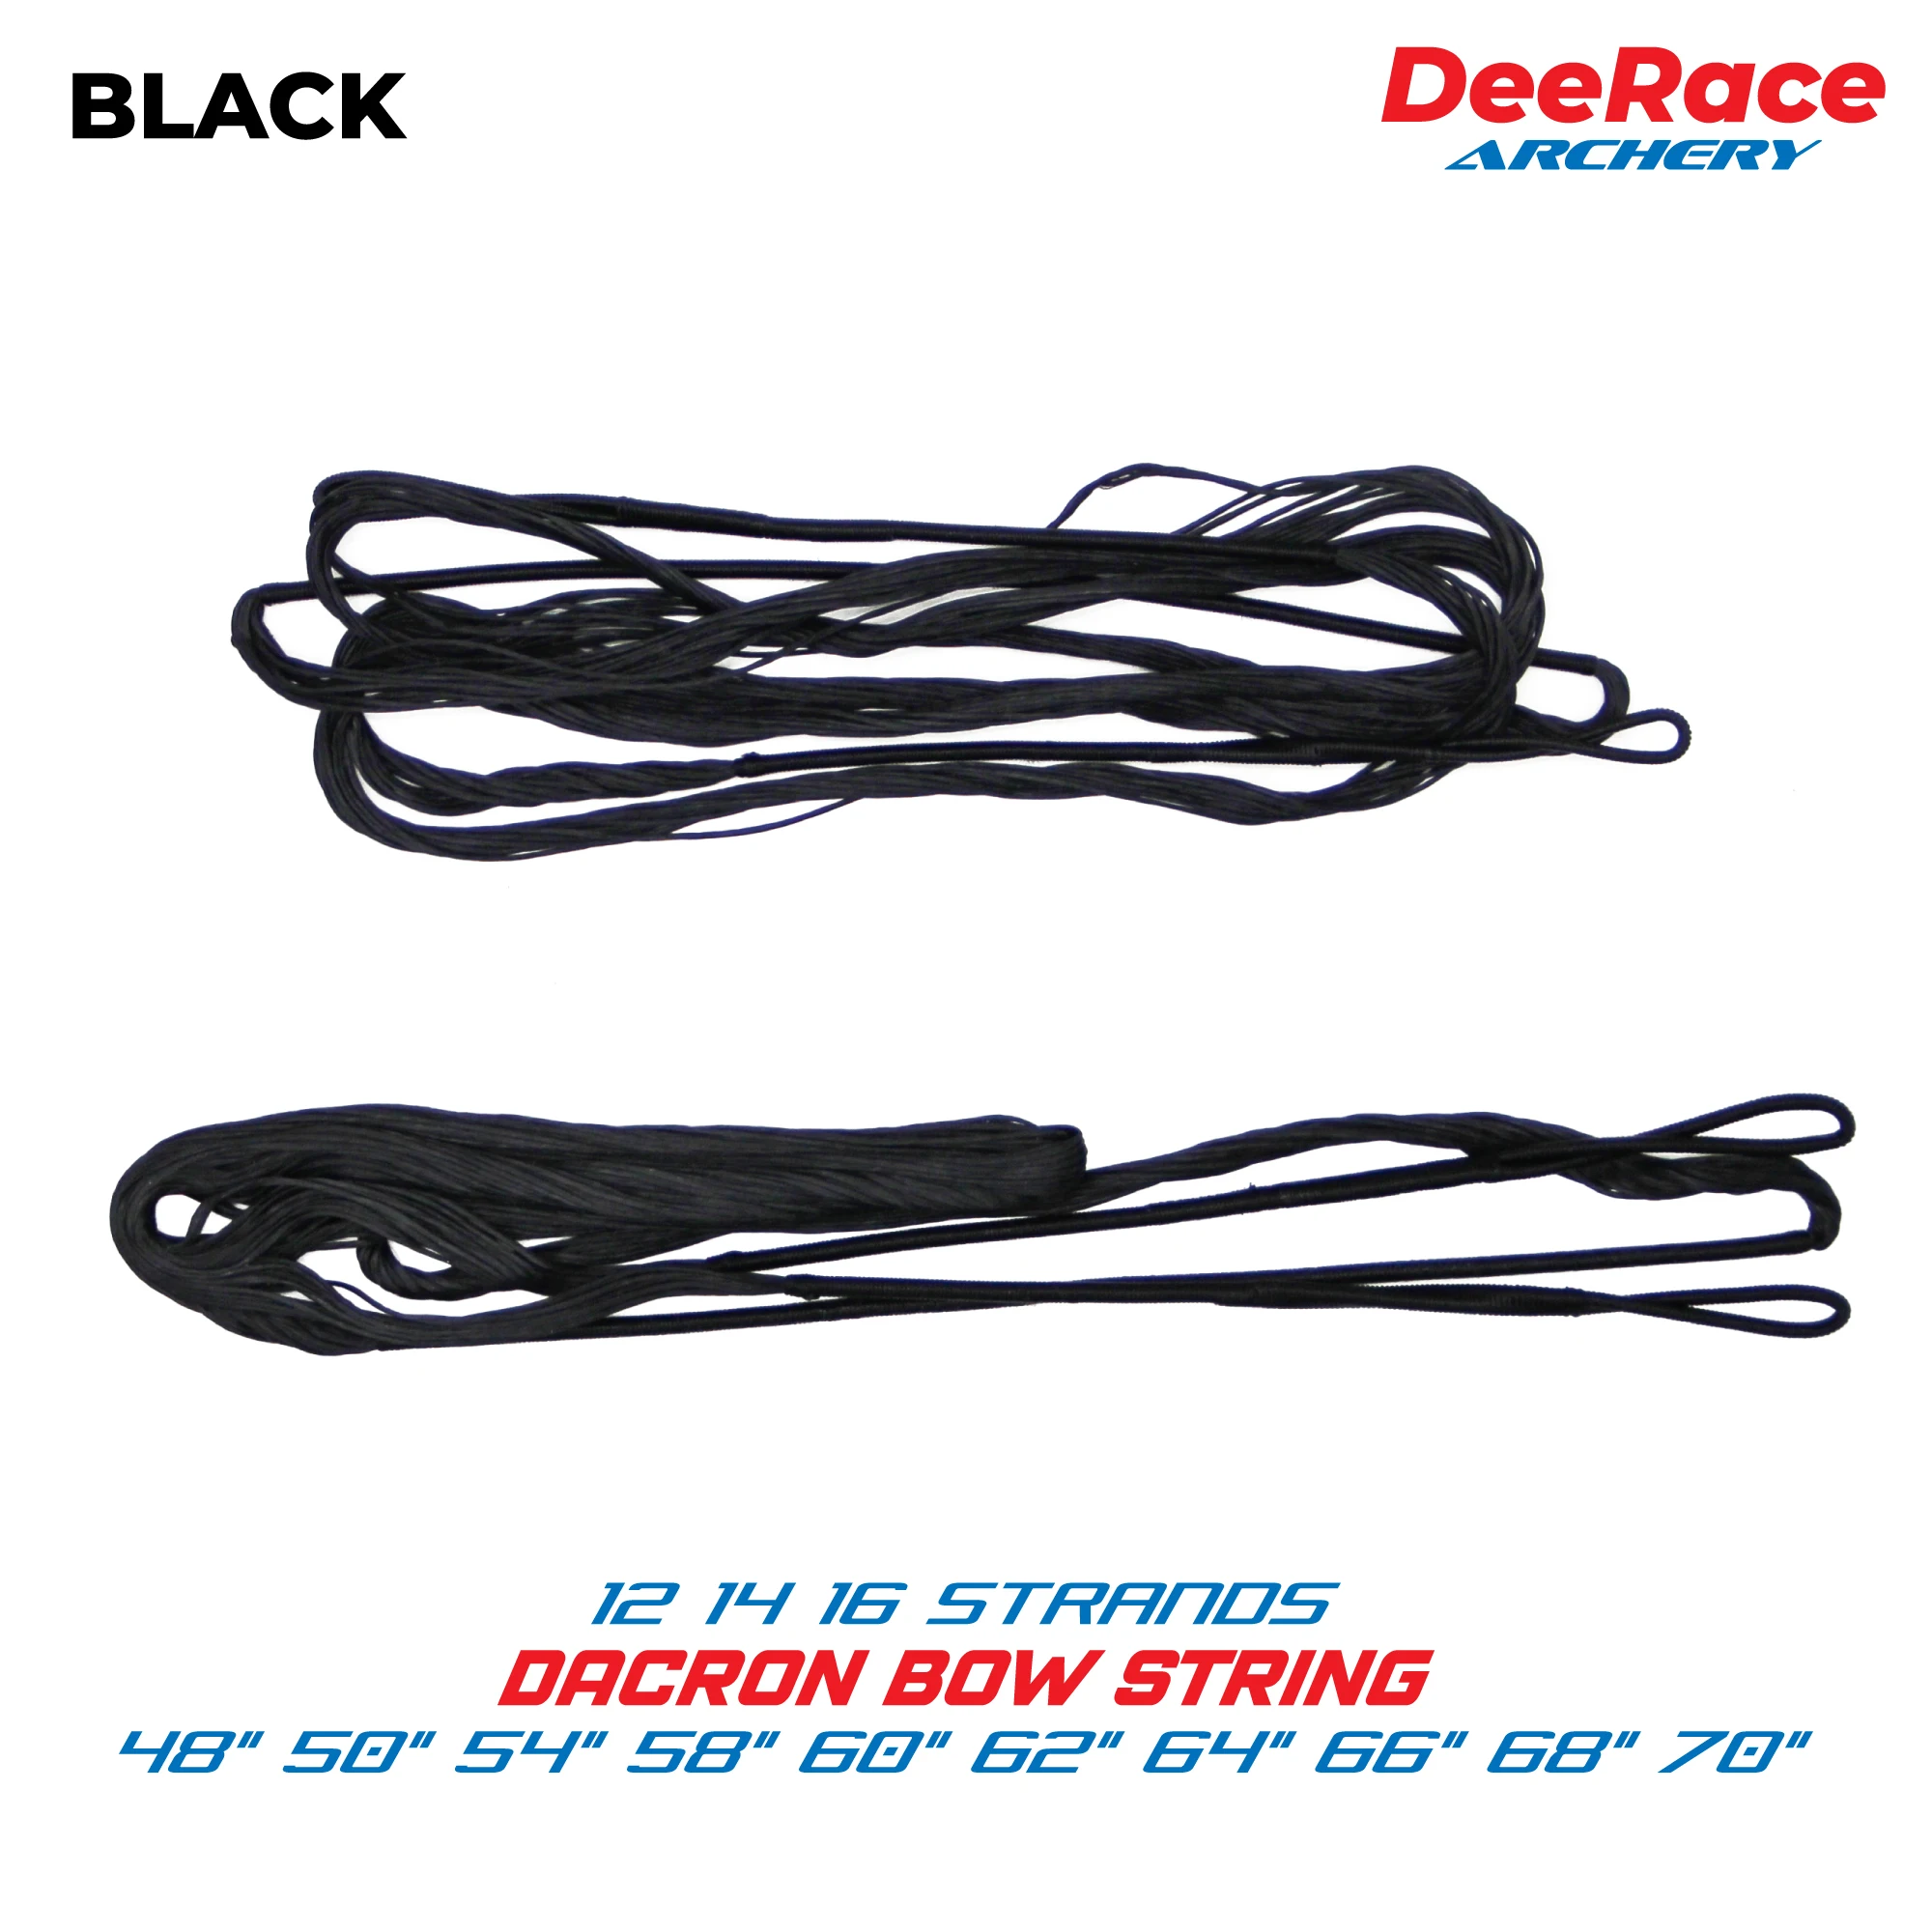 

Archery Recurve Bow Black String Dacron Material 48" 50" 54" 58" 60" 62" 64" 66" 68" 70" Inches 12 14 16 Strands